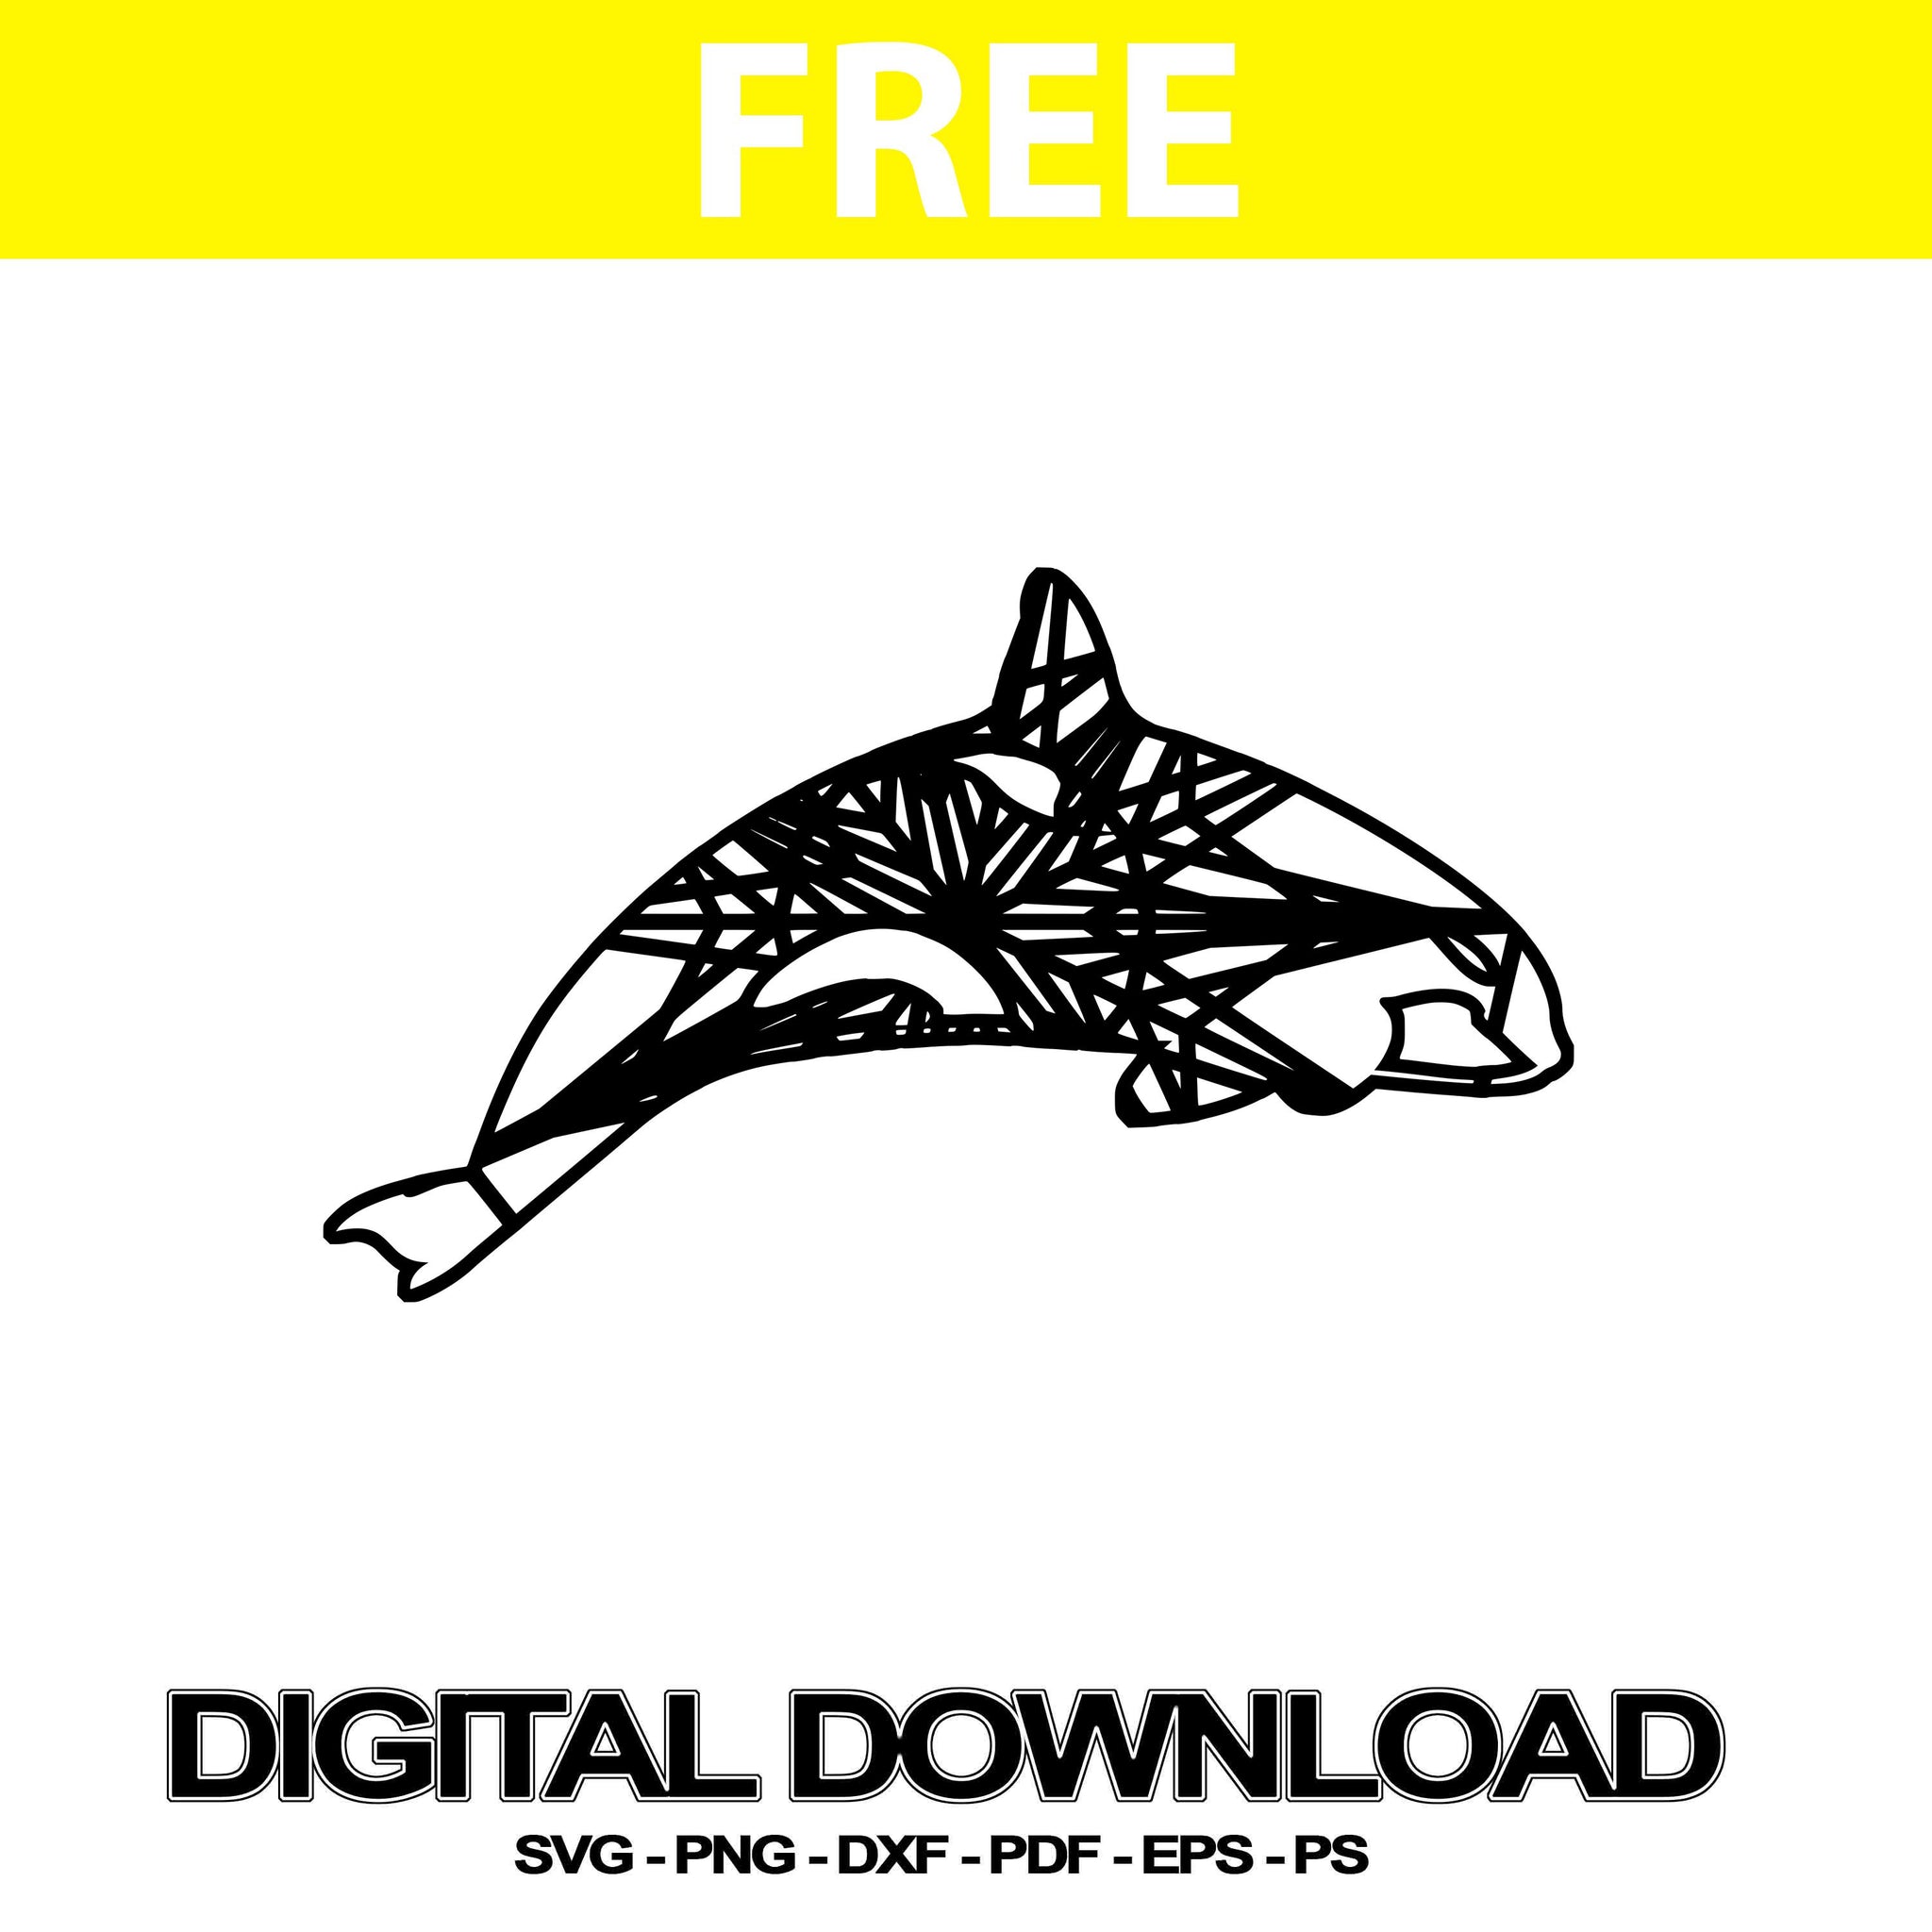 Download Orca Whale Svgs Files Mandala Vector | Svg Free ...